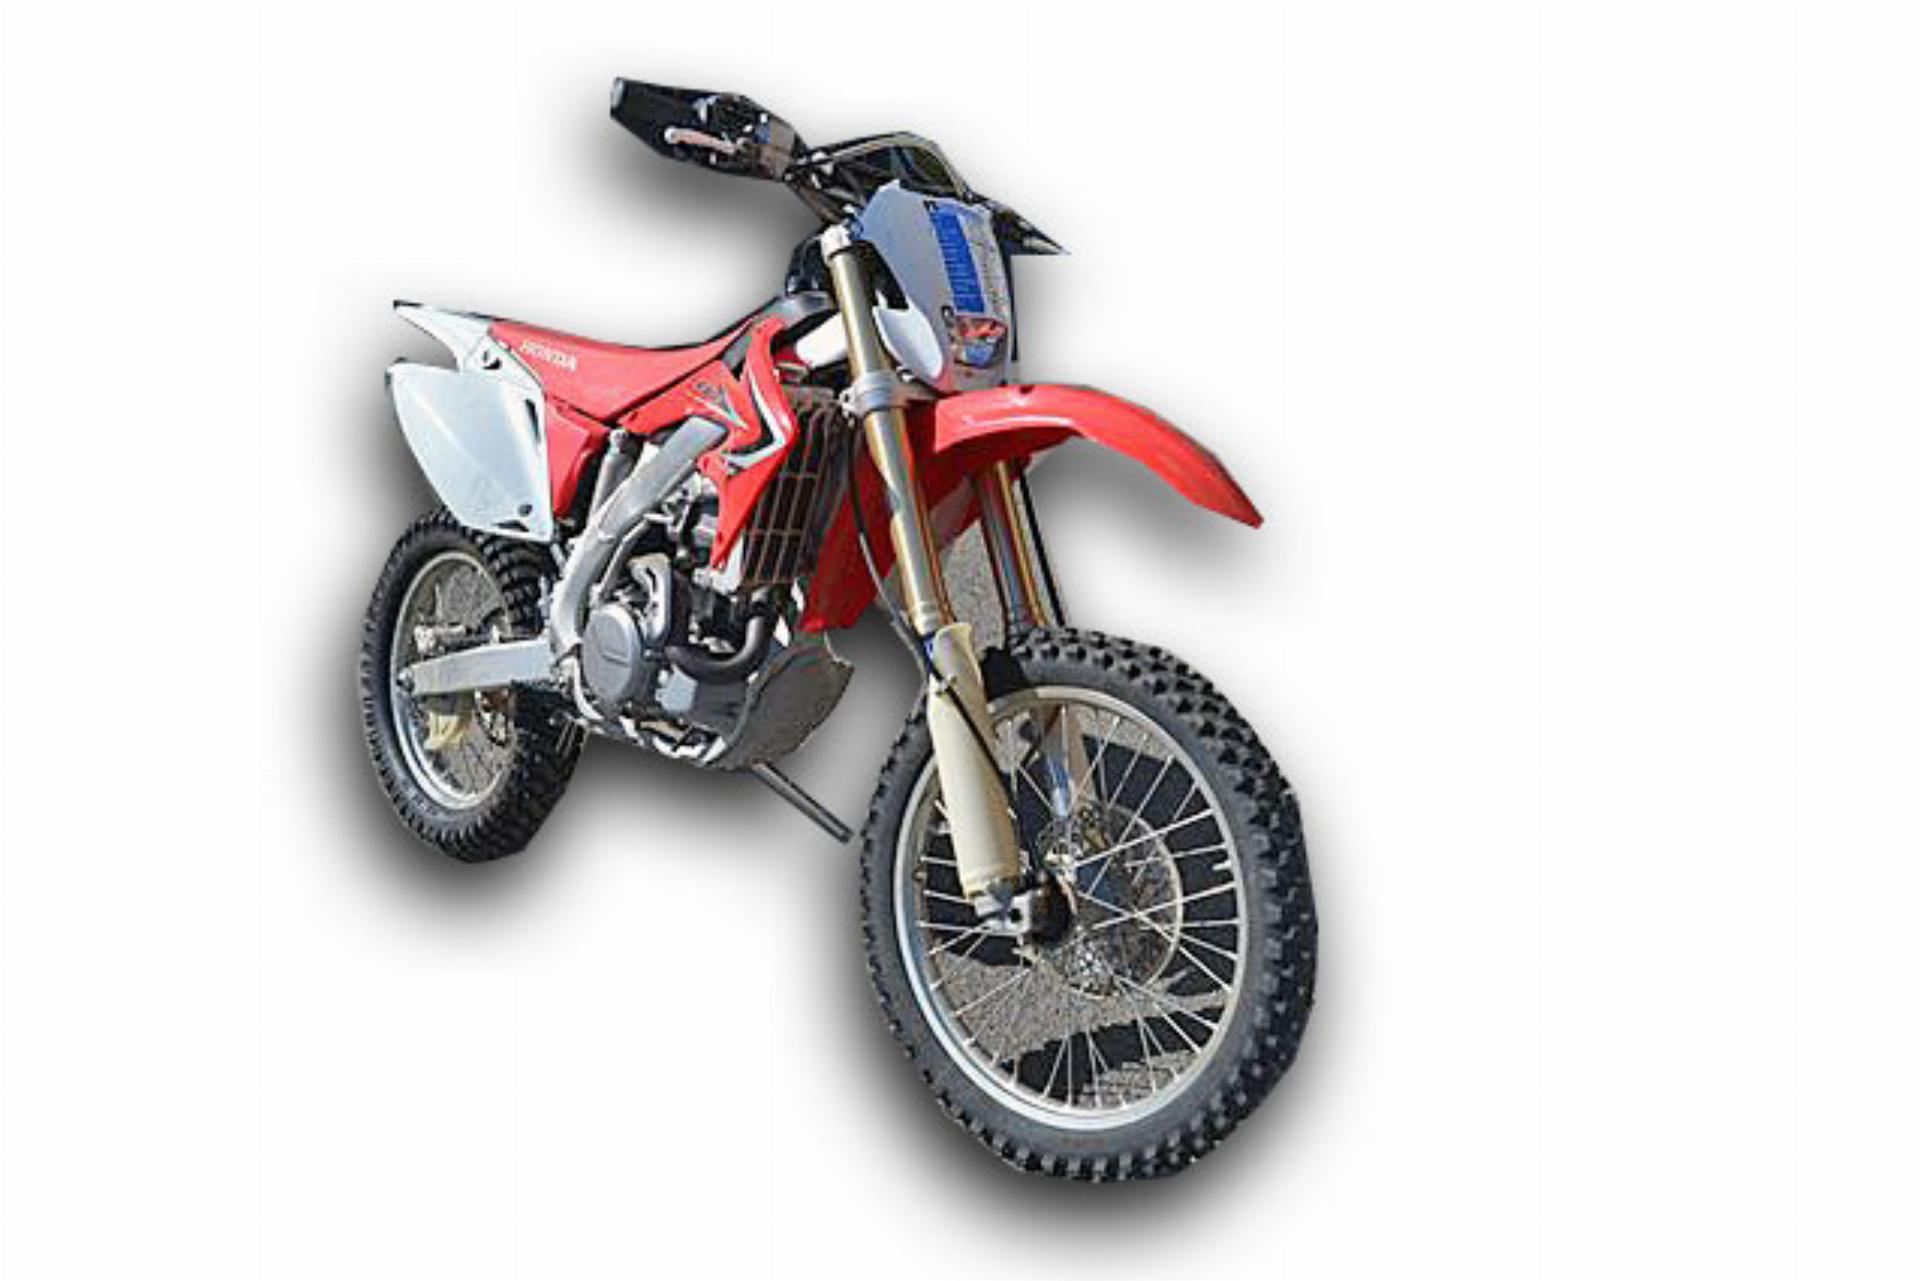 Repossessed Honda Motorcycle CRF 450 X 2013 on auction